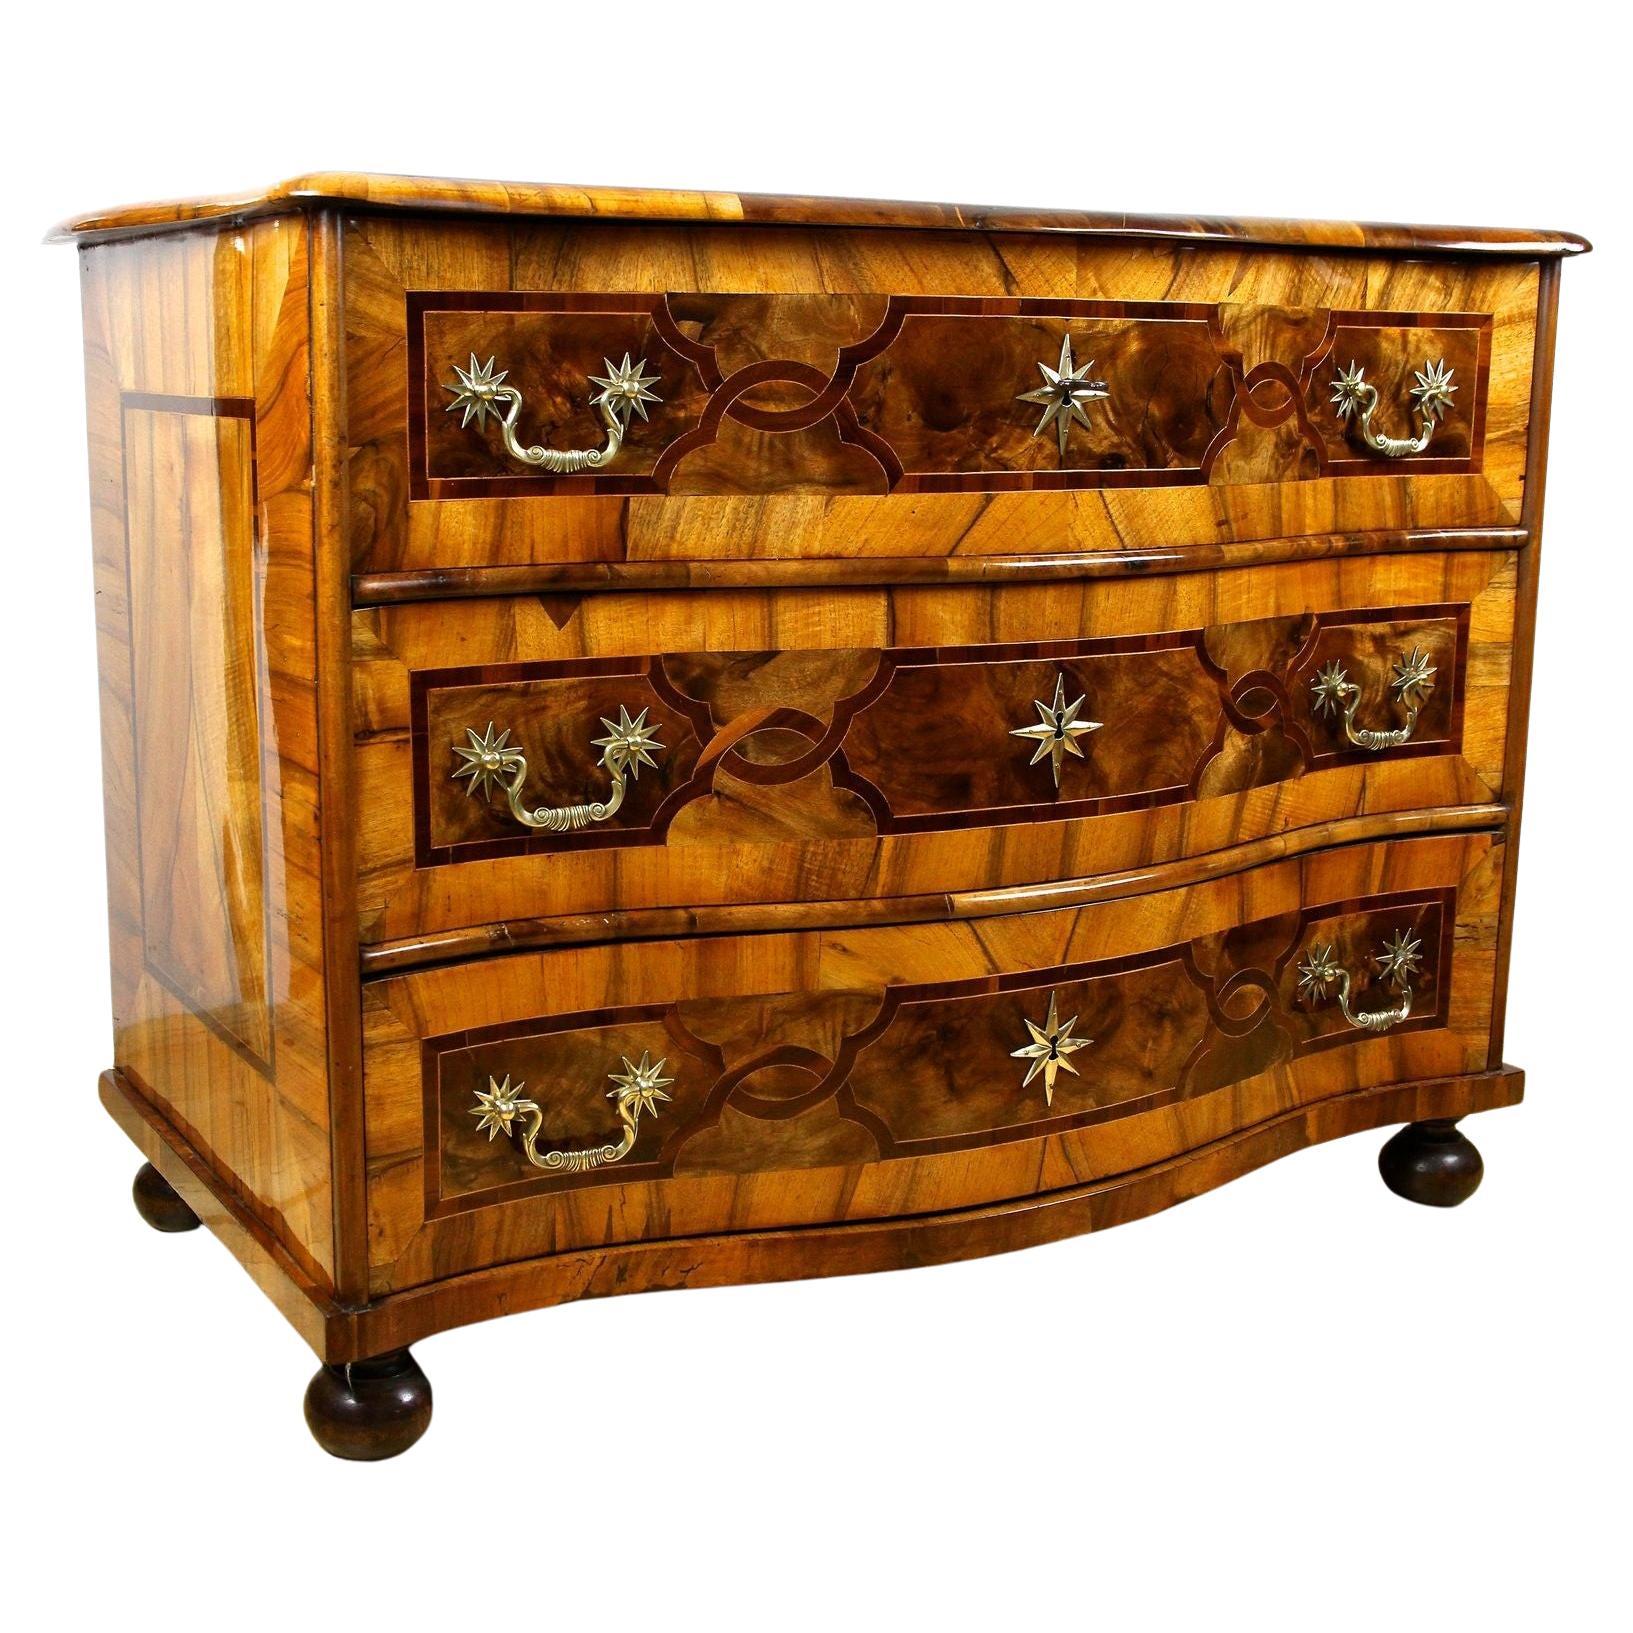 18th Century Baroque Chest of Drawers with Marquetry Works, Germany circa 1760